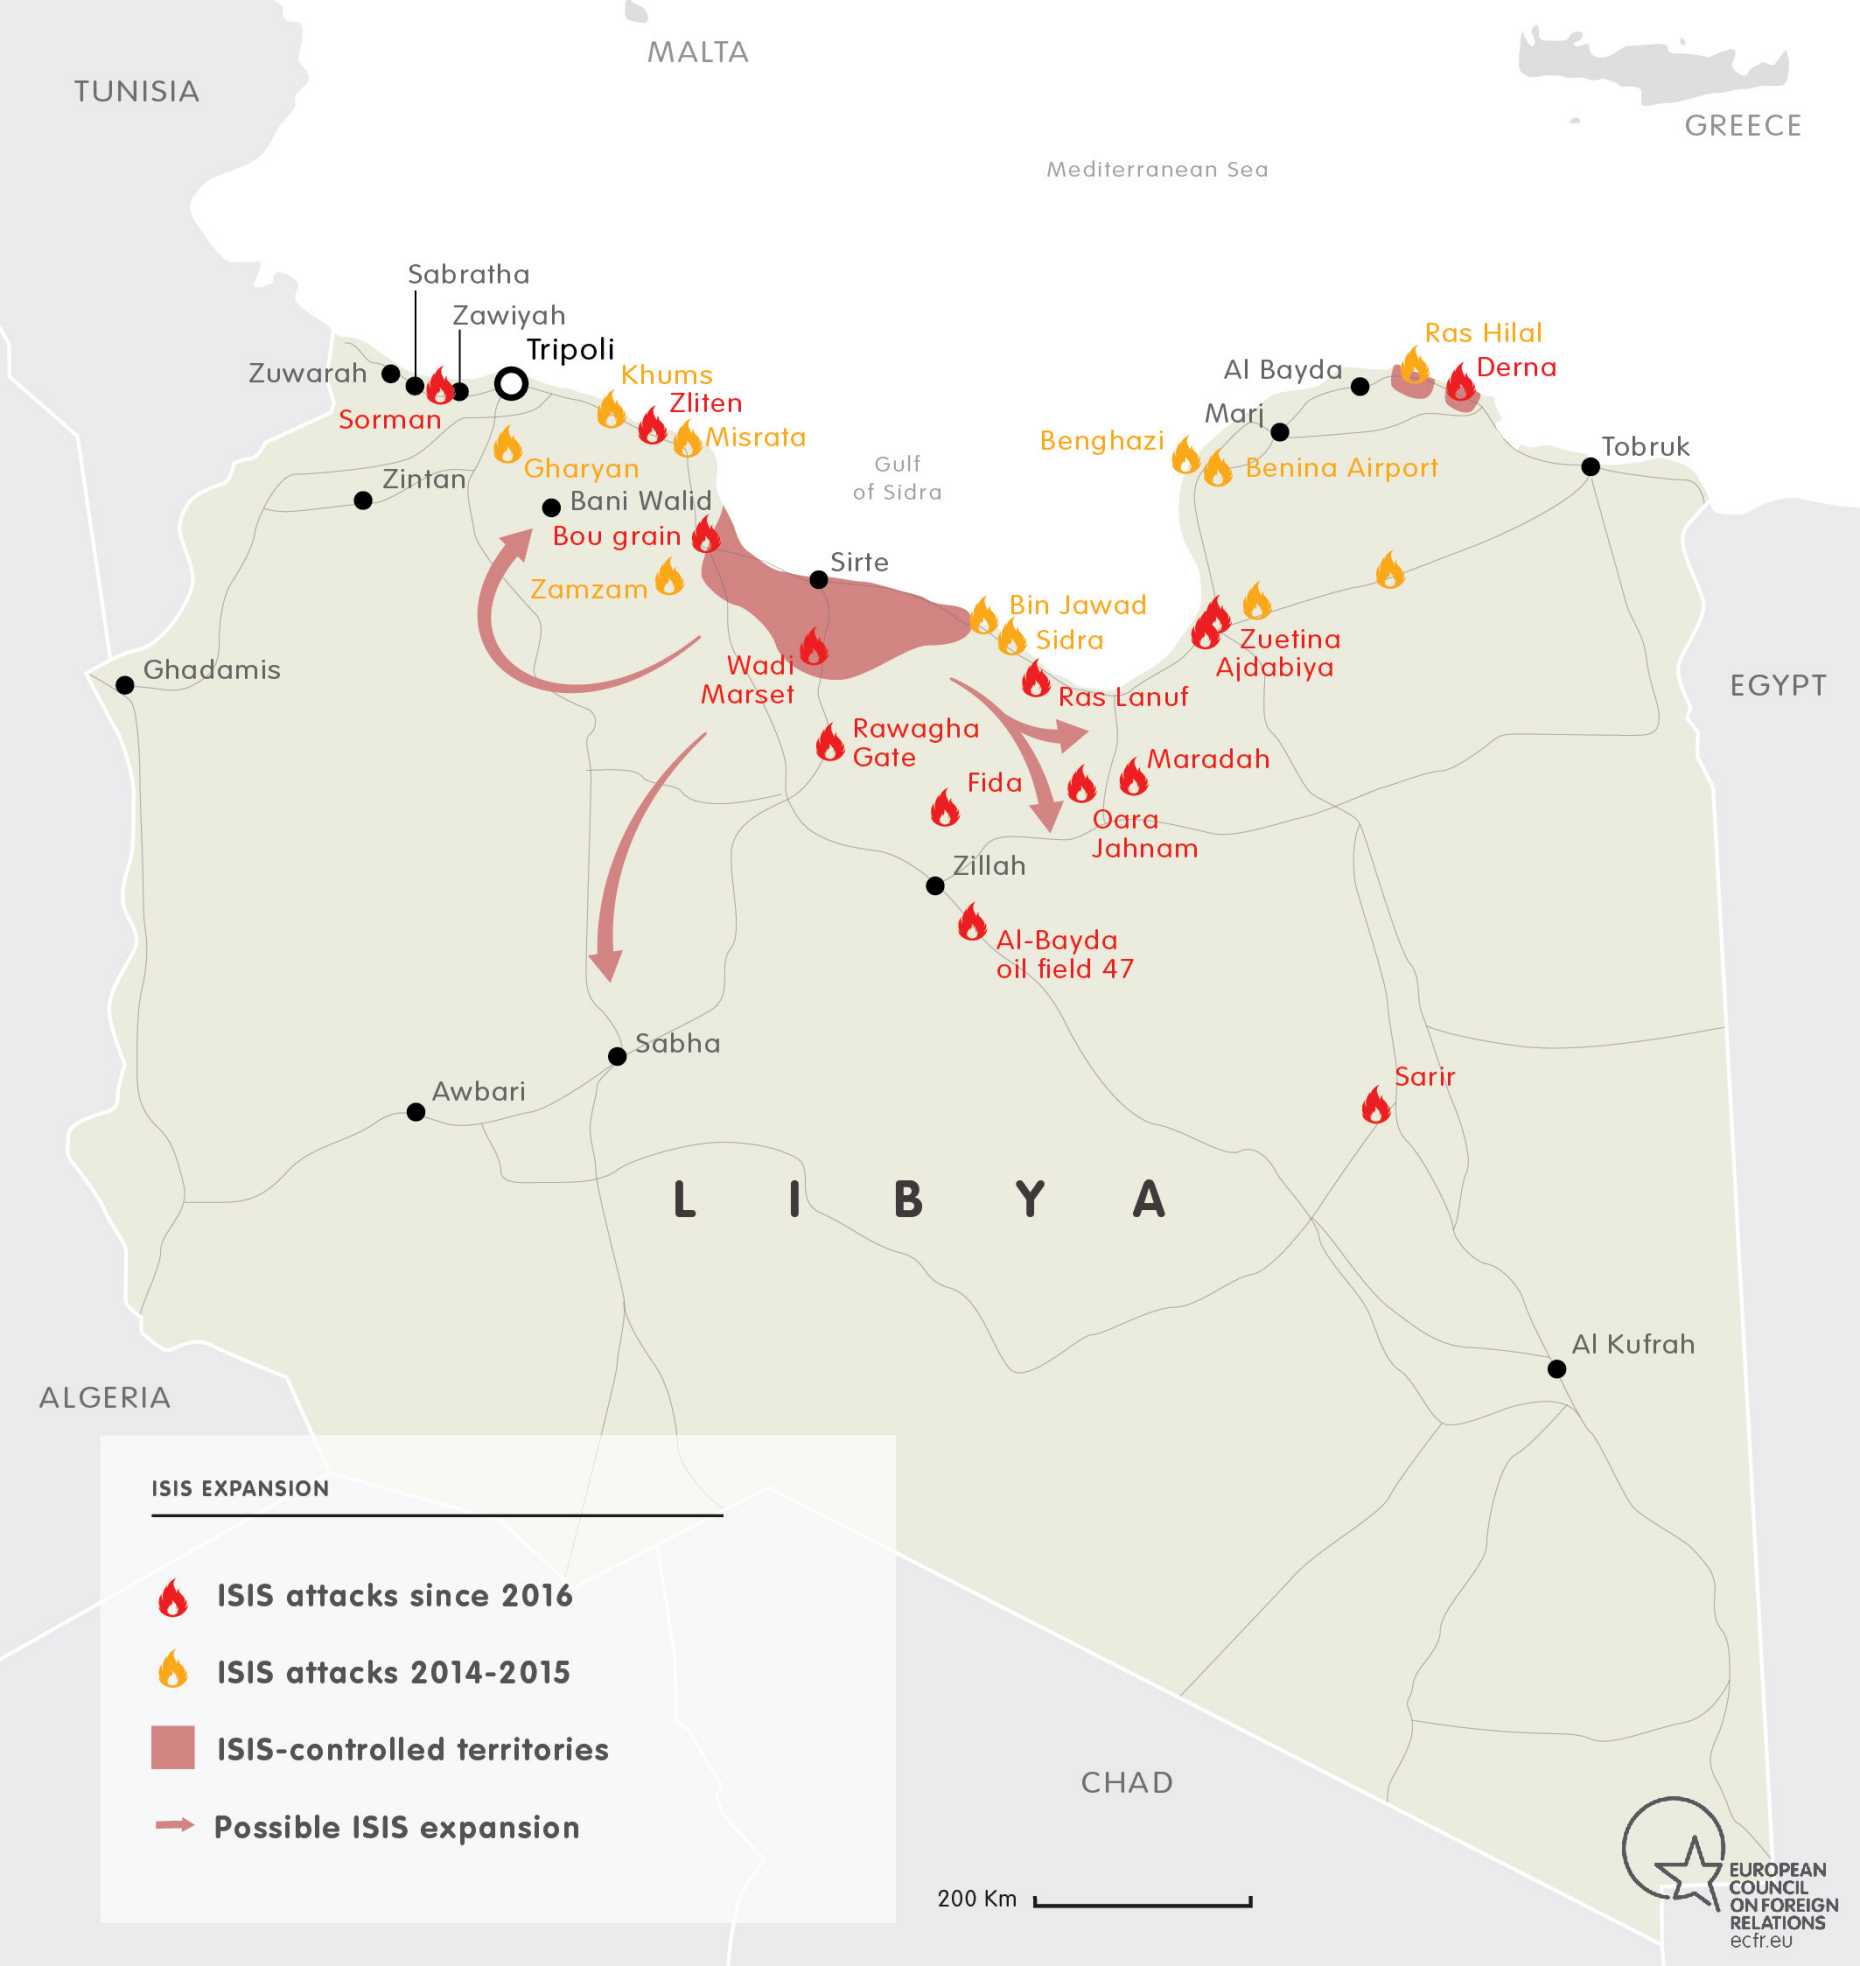 ISIS expansion in Libya (2014-2016)